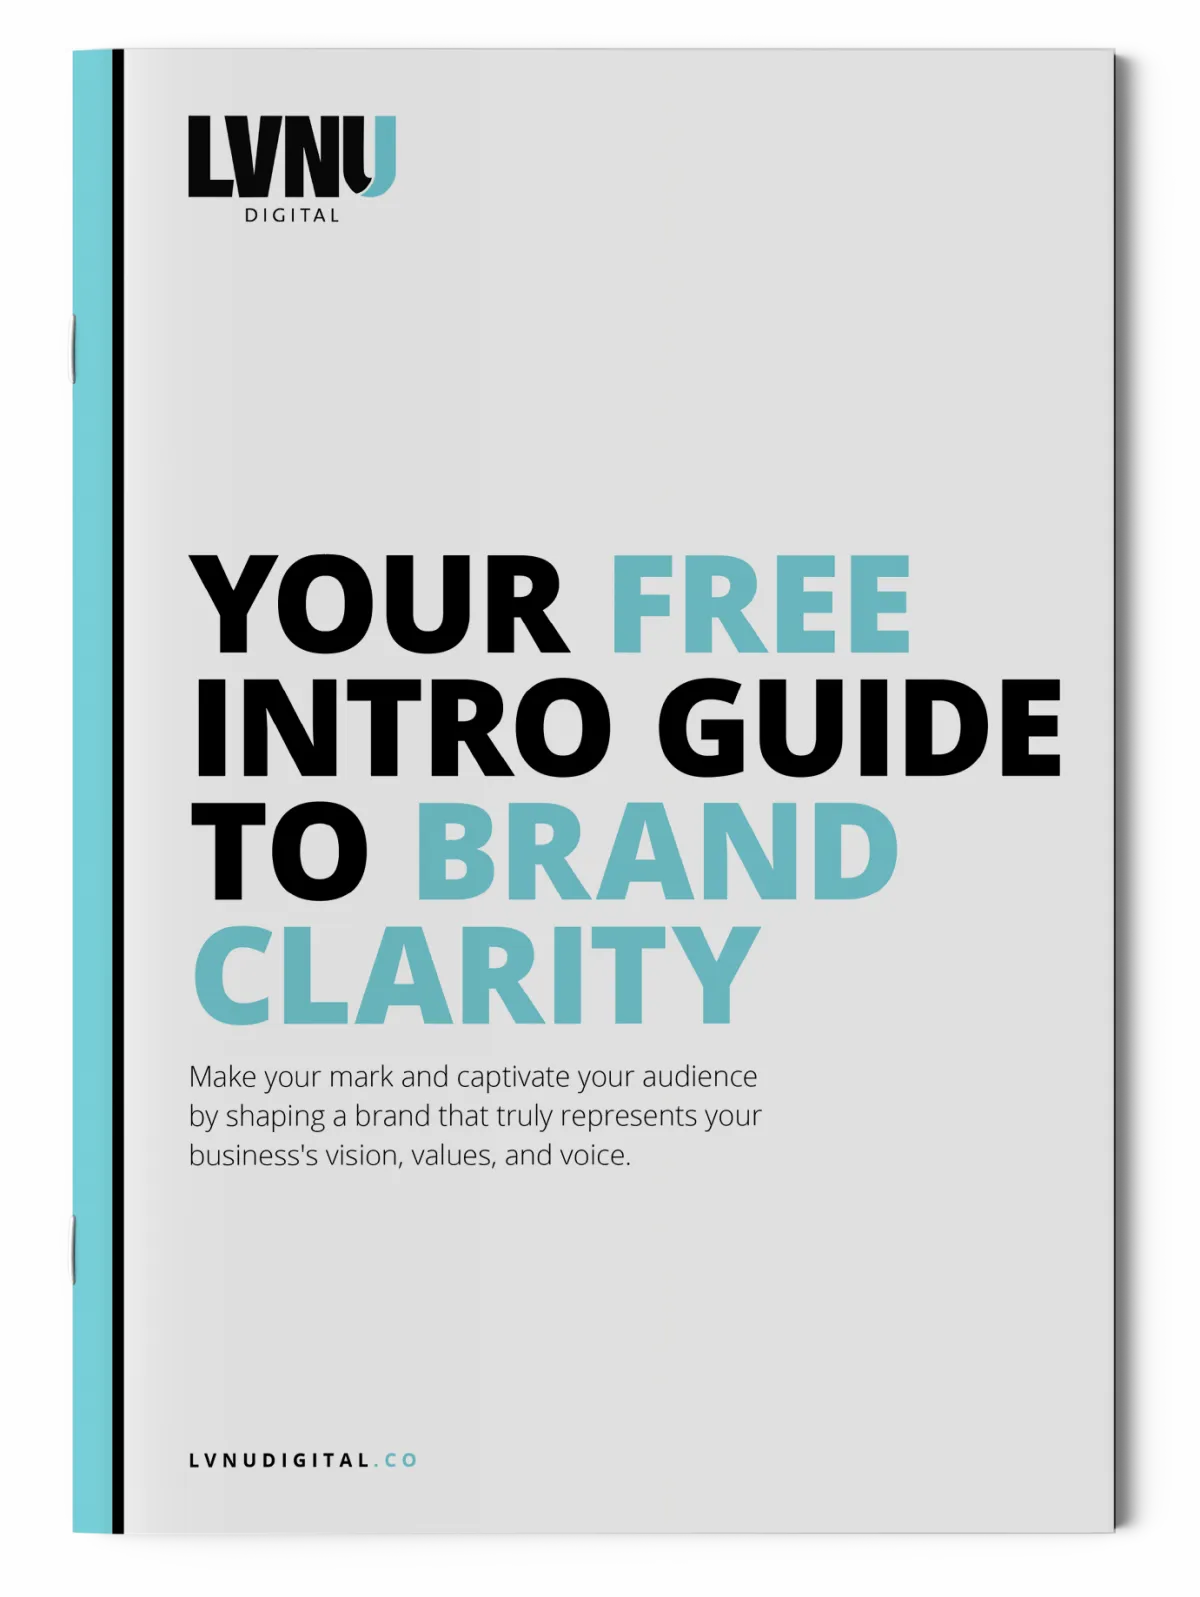 Overhead view of a booklet that reads: LVNU Digital; Your Free Intro Guide to Brand Clarity; Make your mark and captivate your audience by shaping a brand that truly represents your business's vision, values, and voice. 